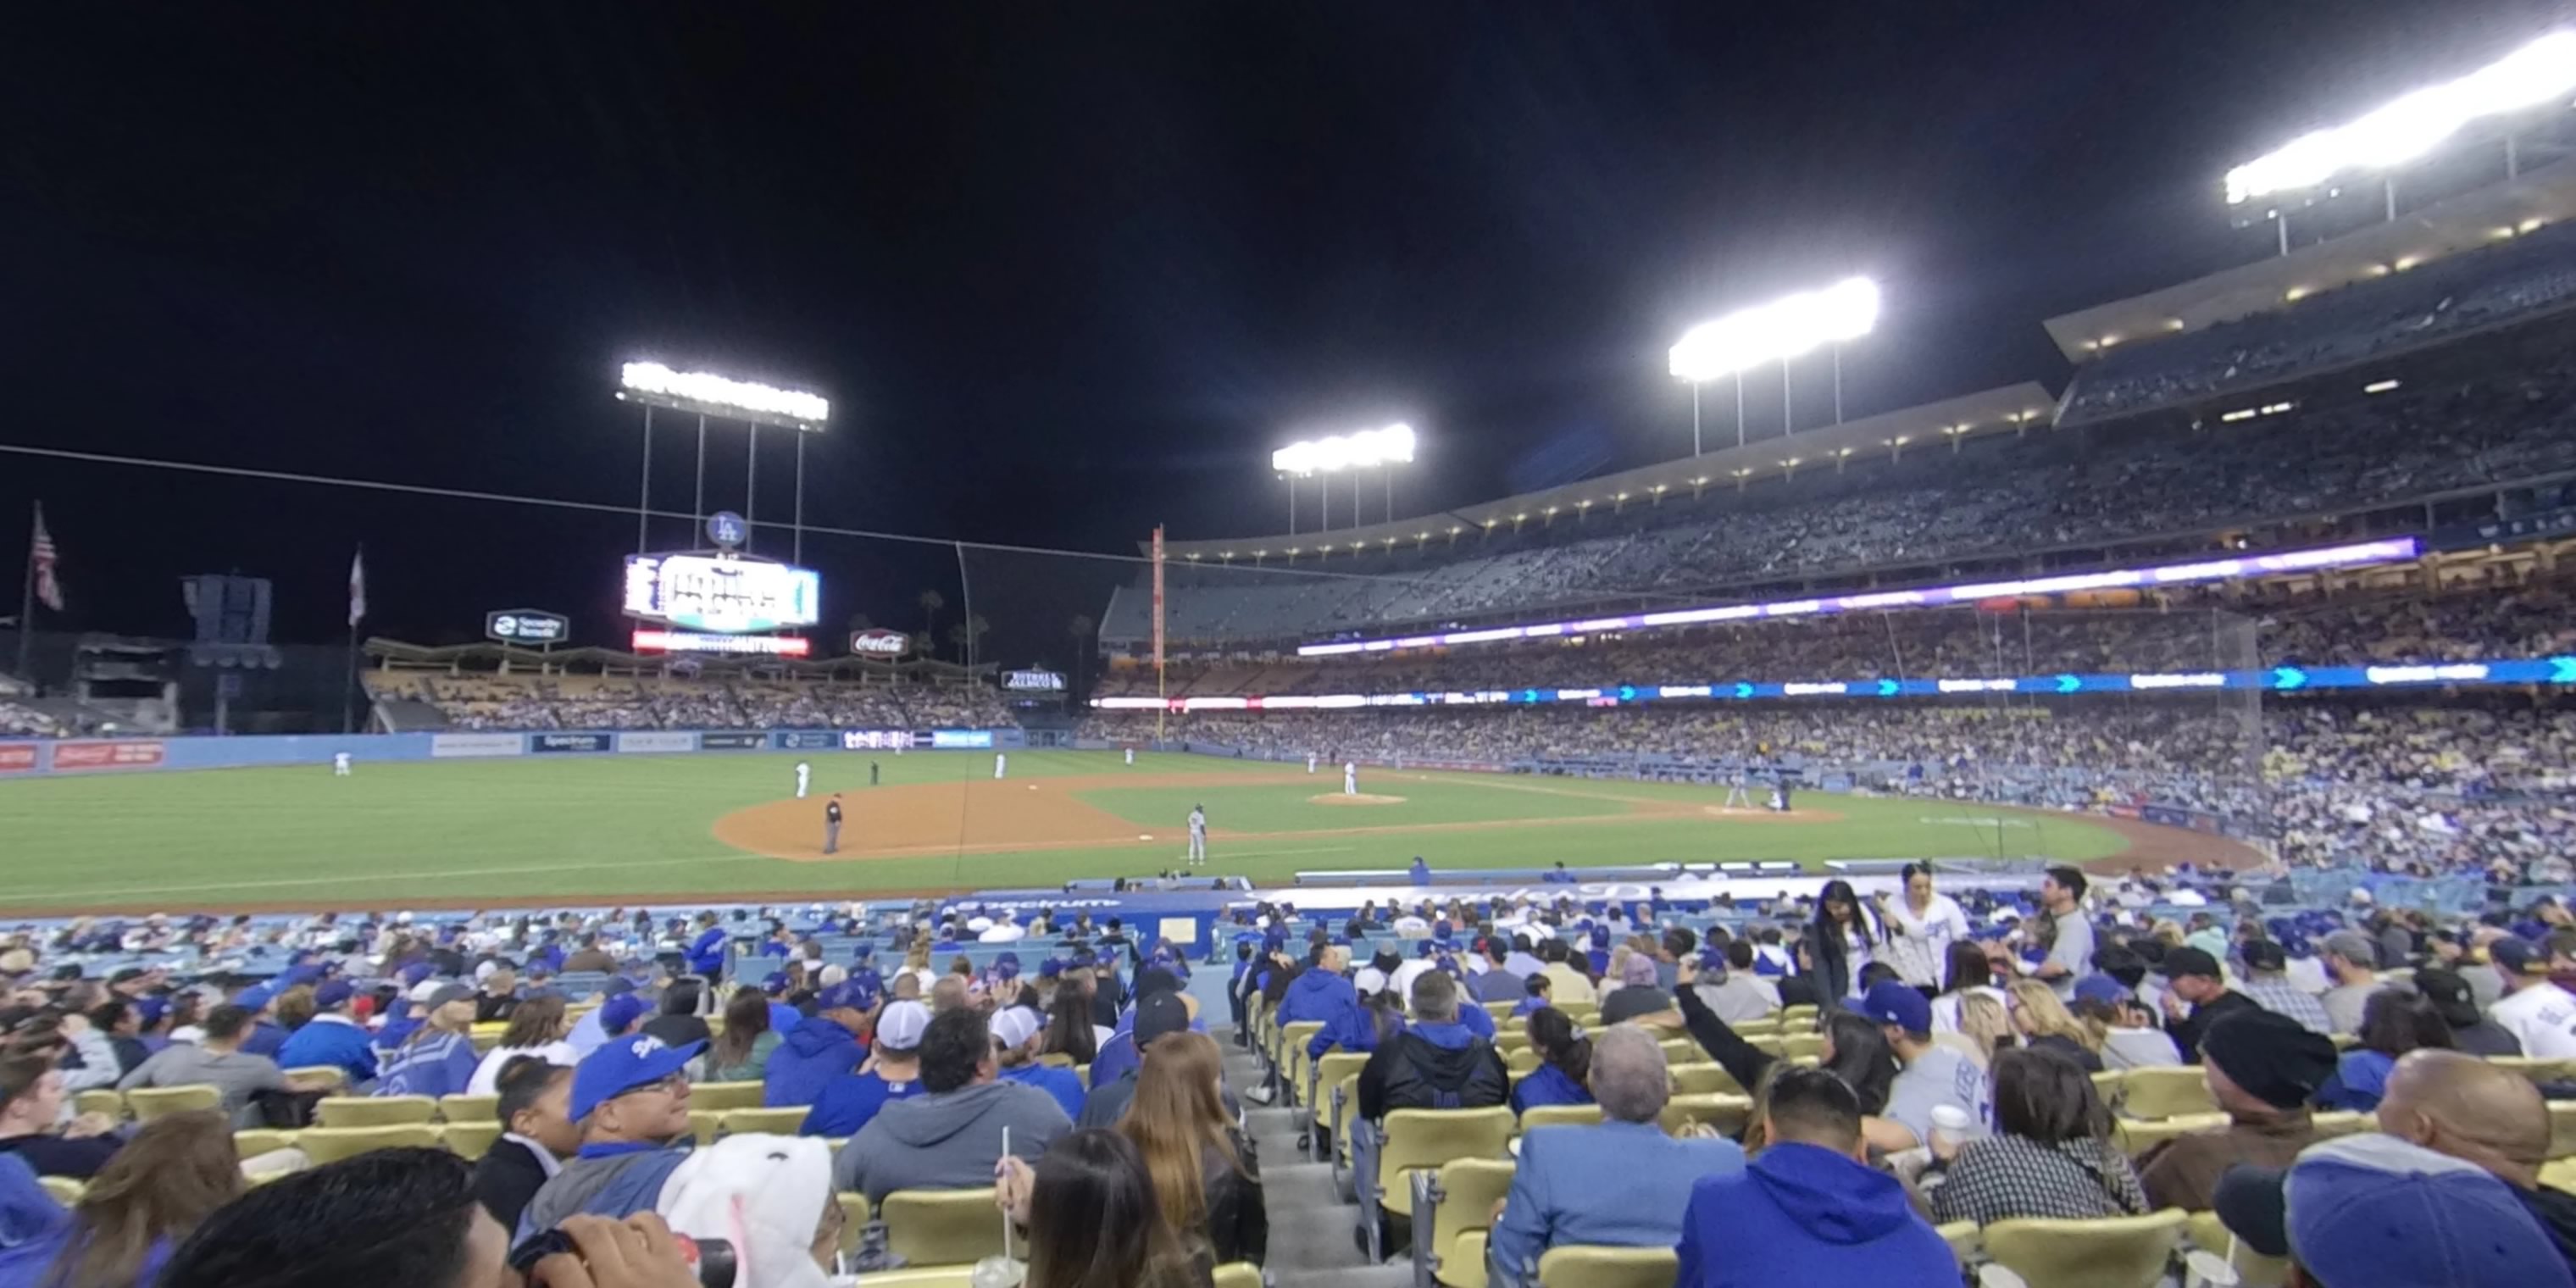 How Many Seats In A Row At Dodgers Stadium Elcho Table